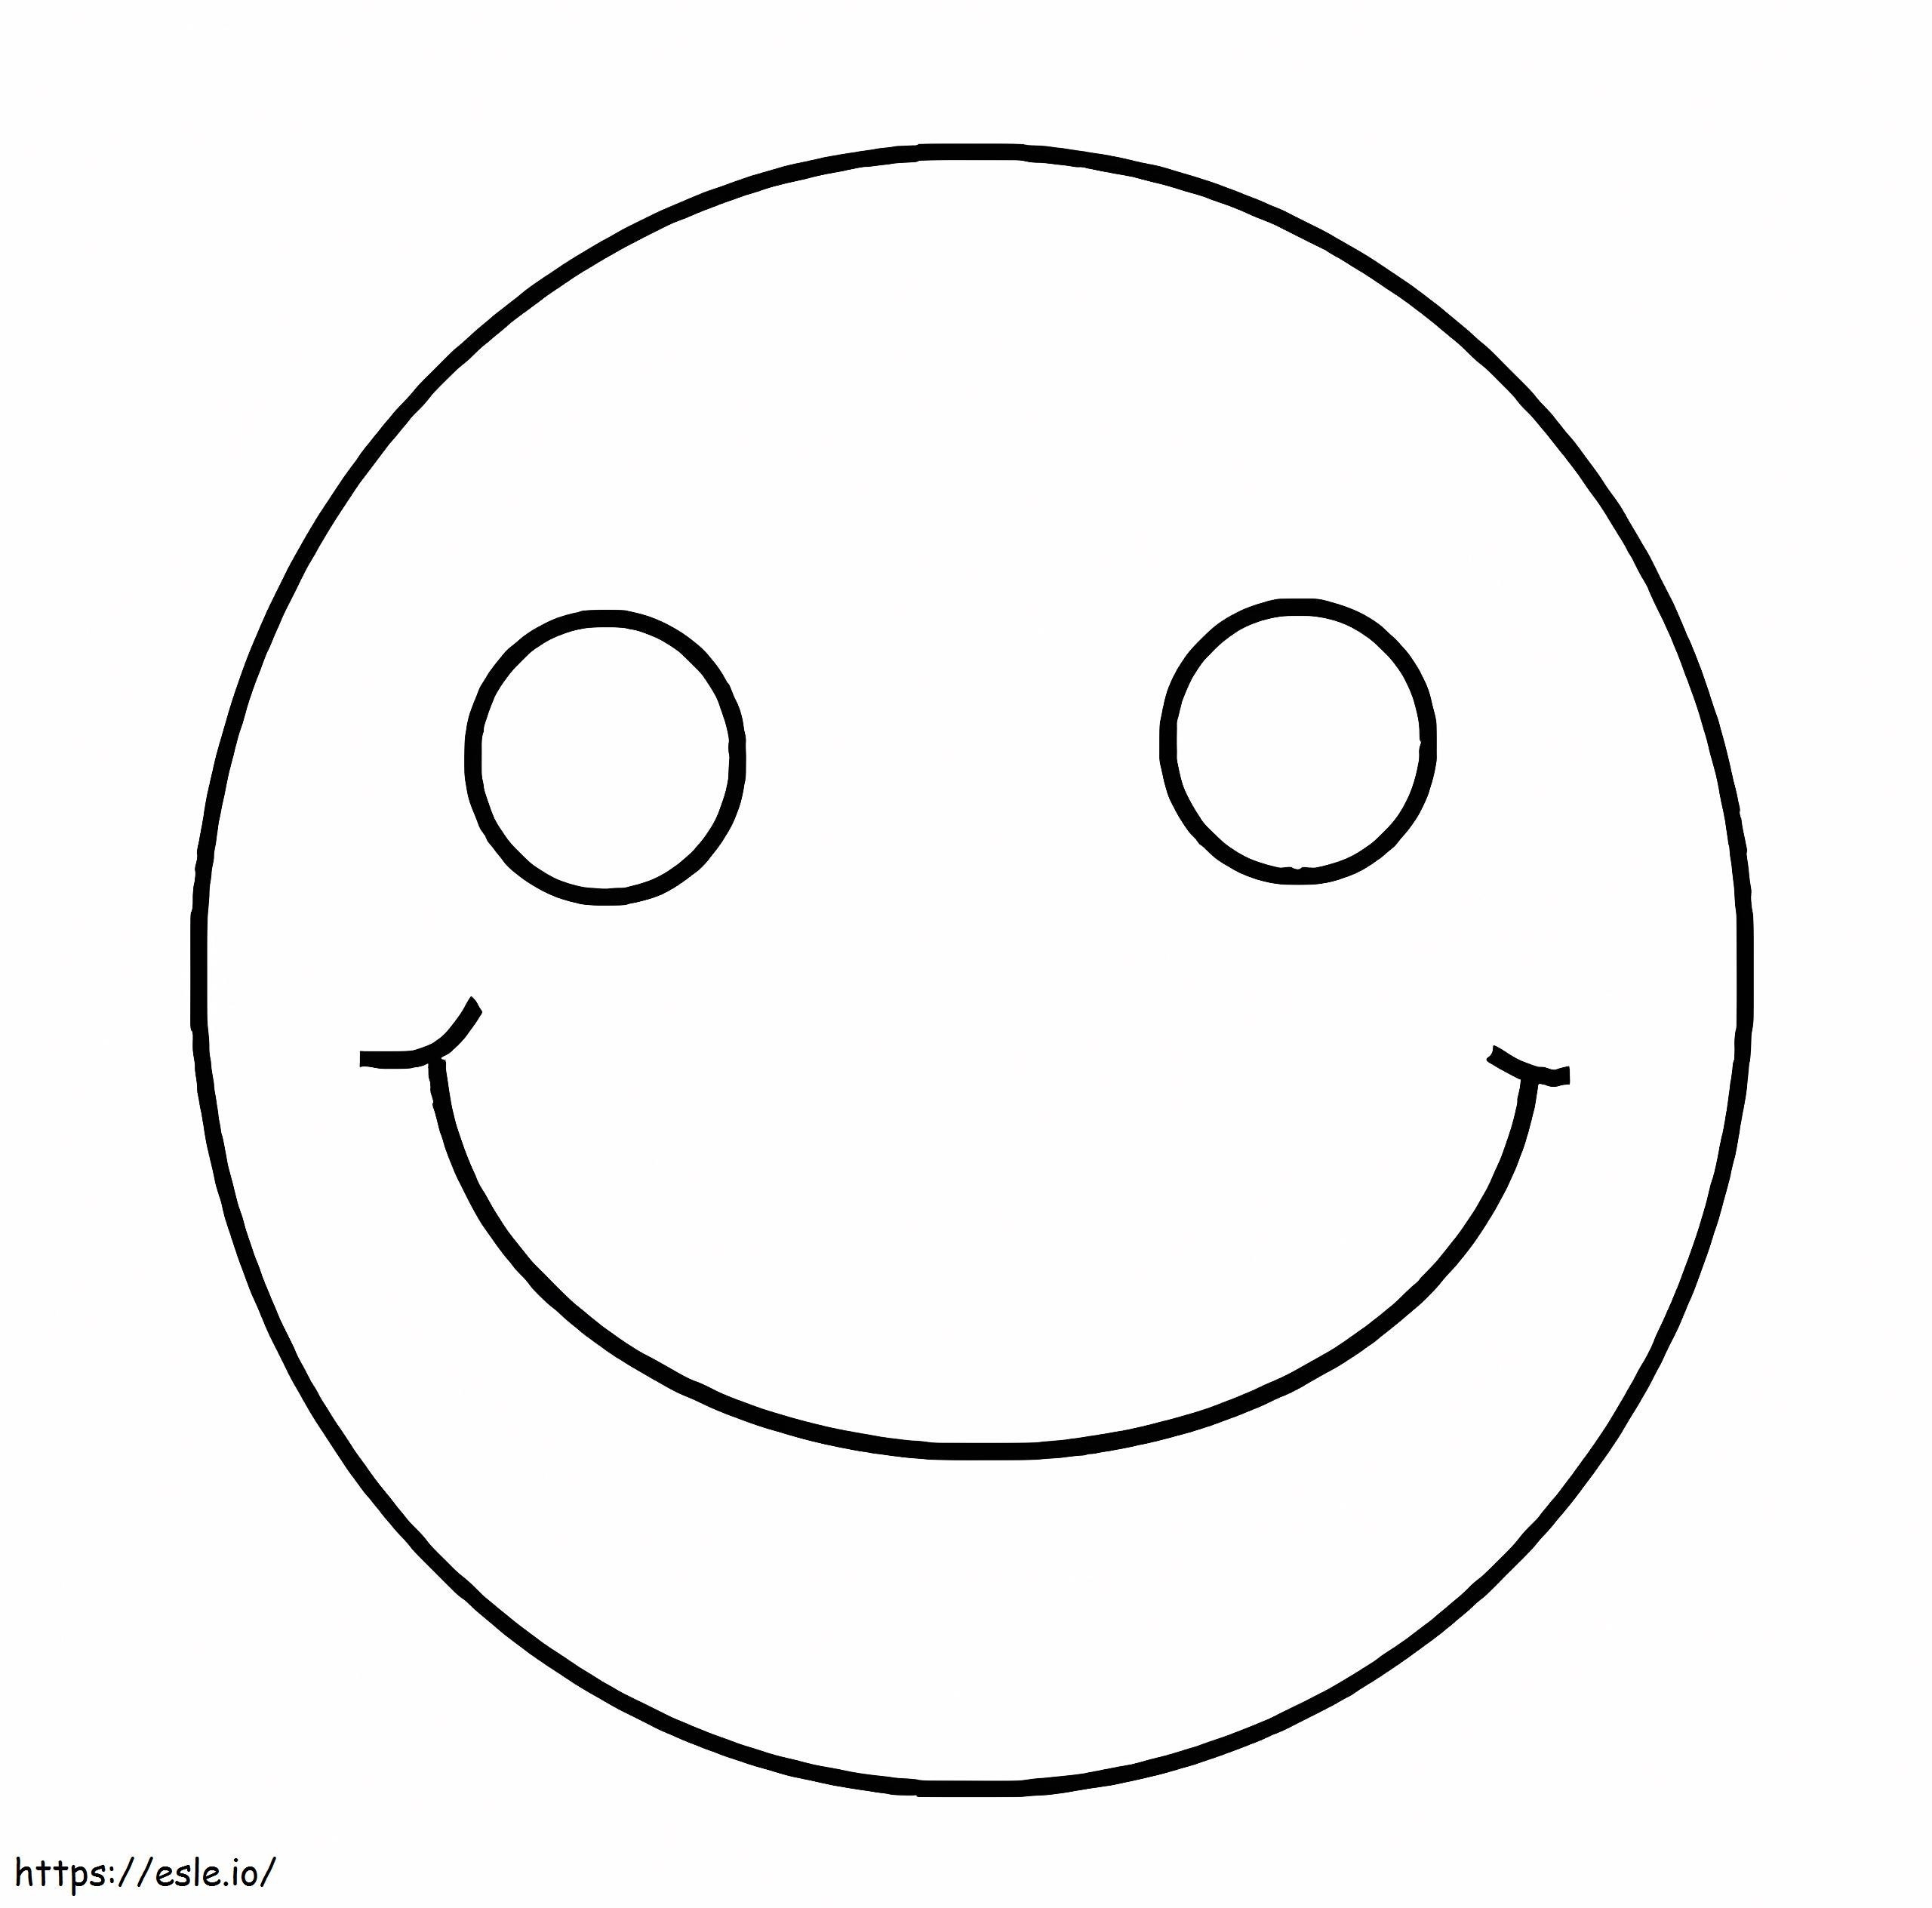 Smiley Face 10 coloring page